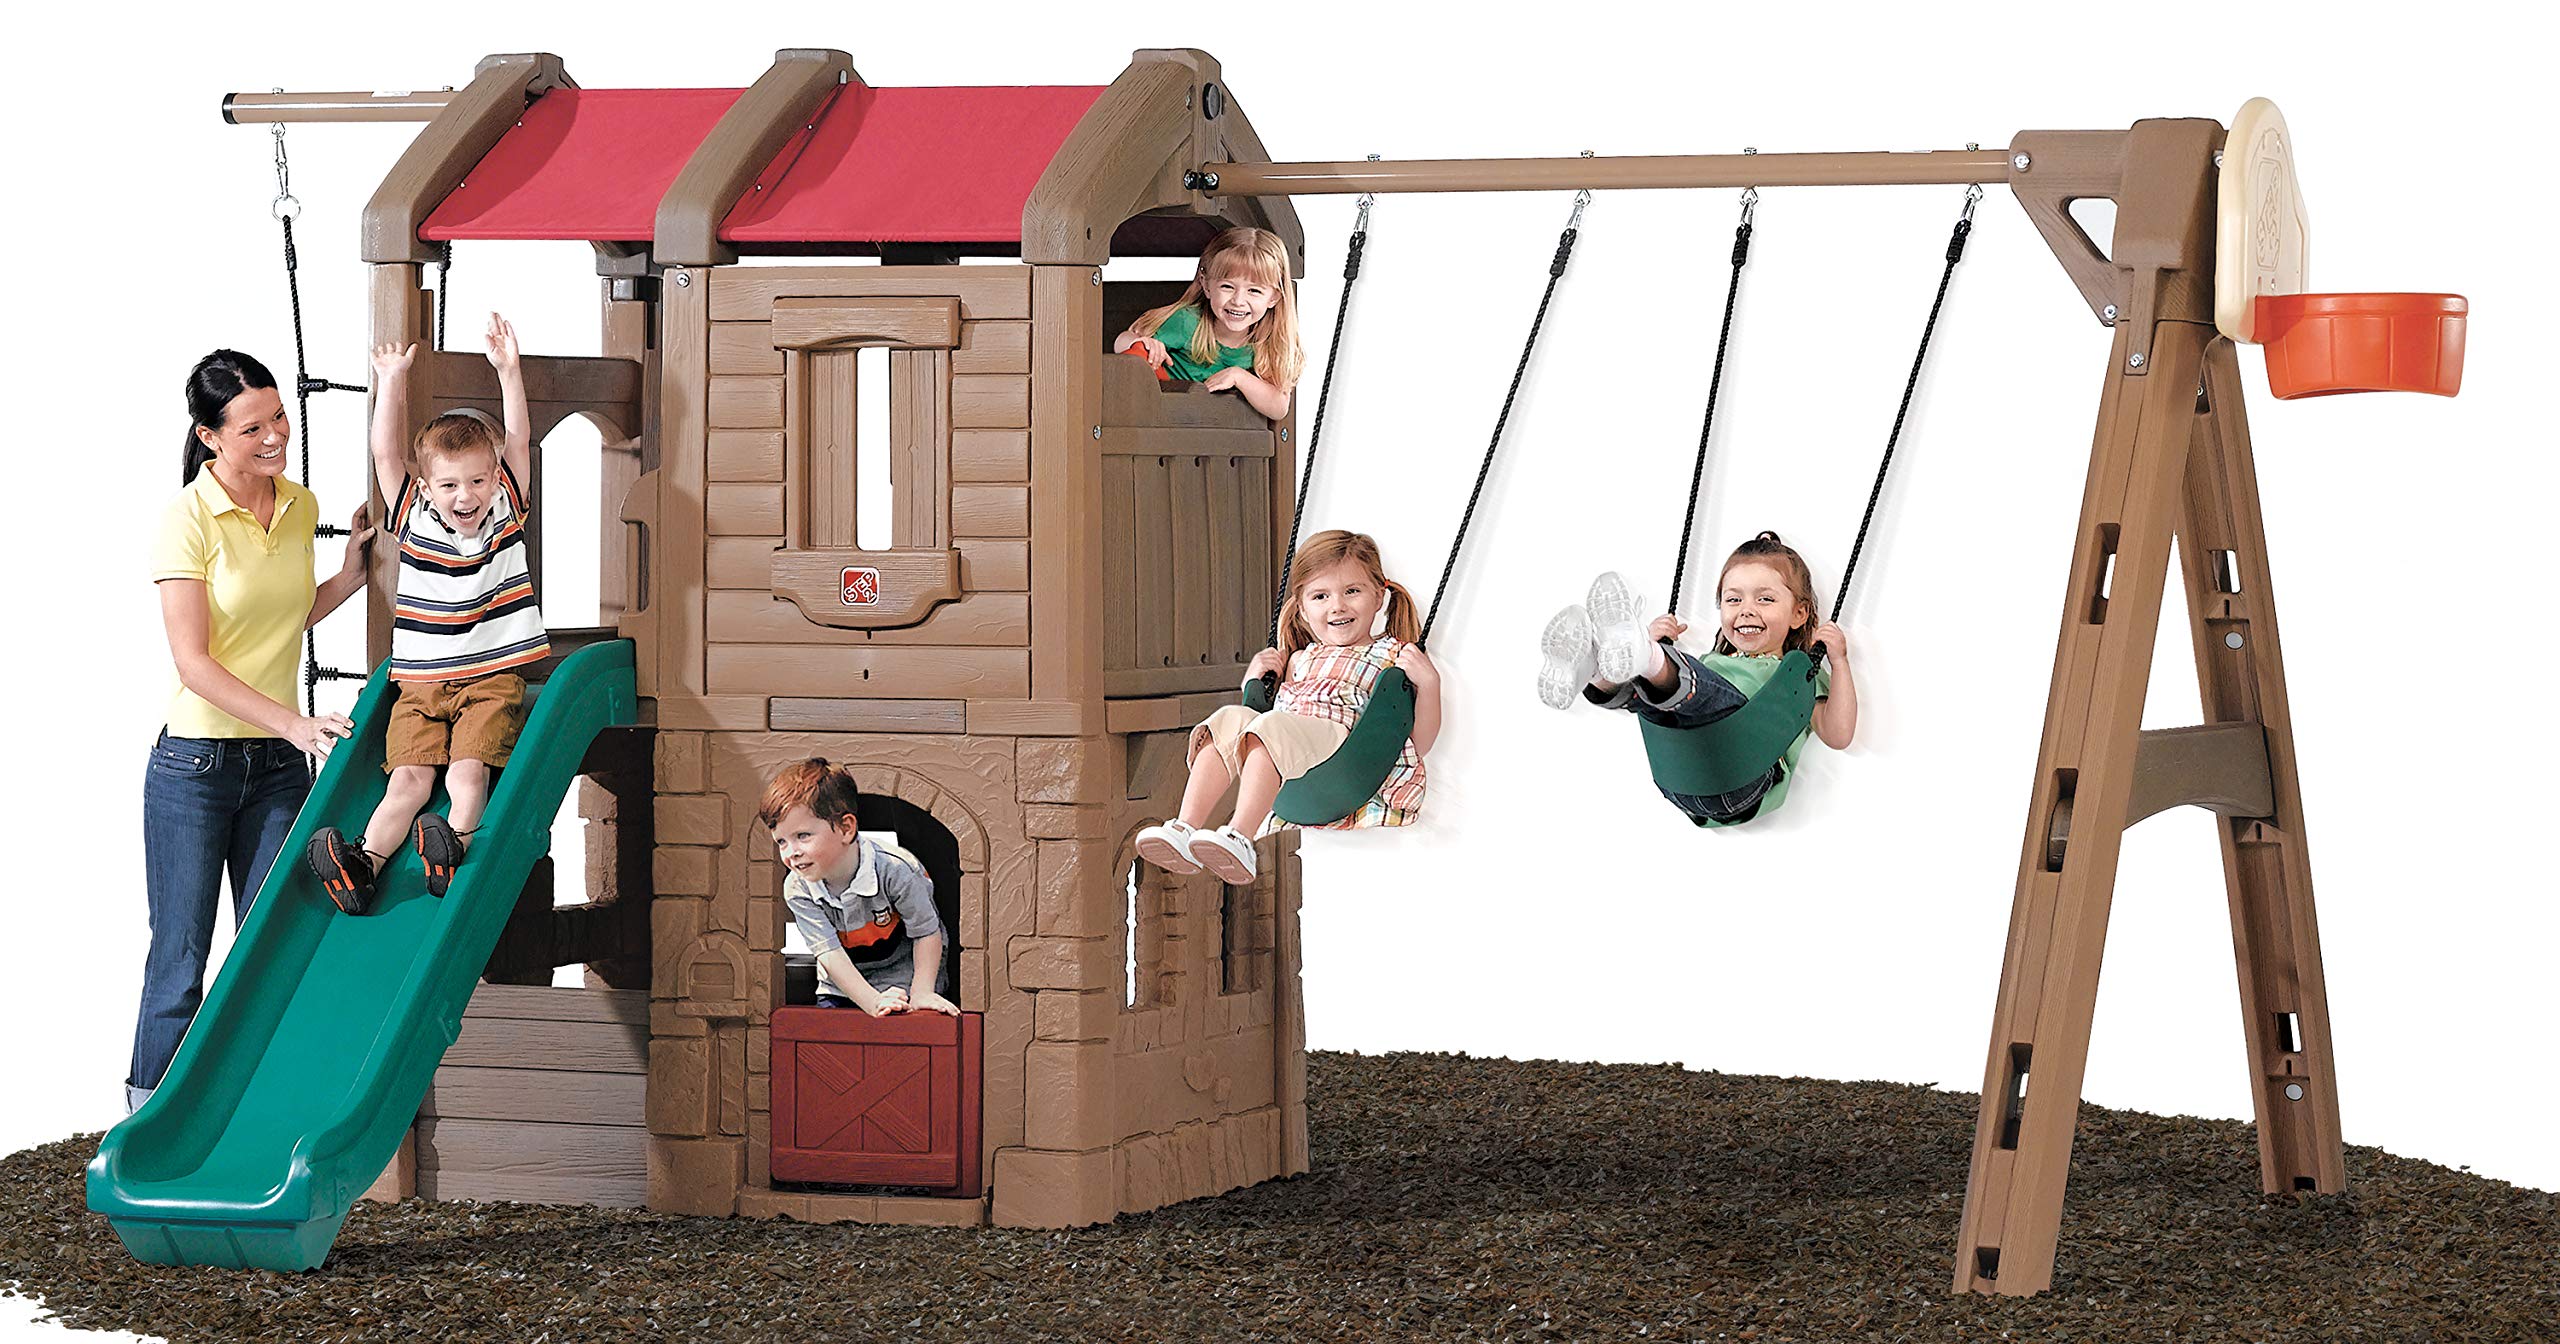 Looking to Buy Plum My First Wooden Playcentre for Your Little One. Here